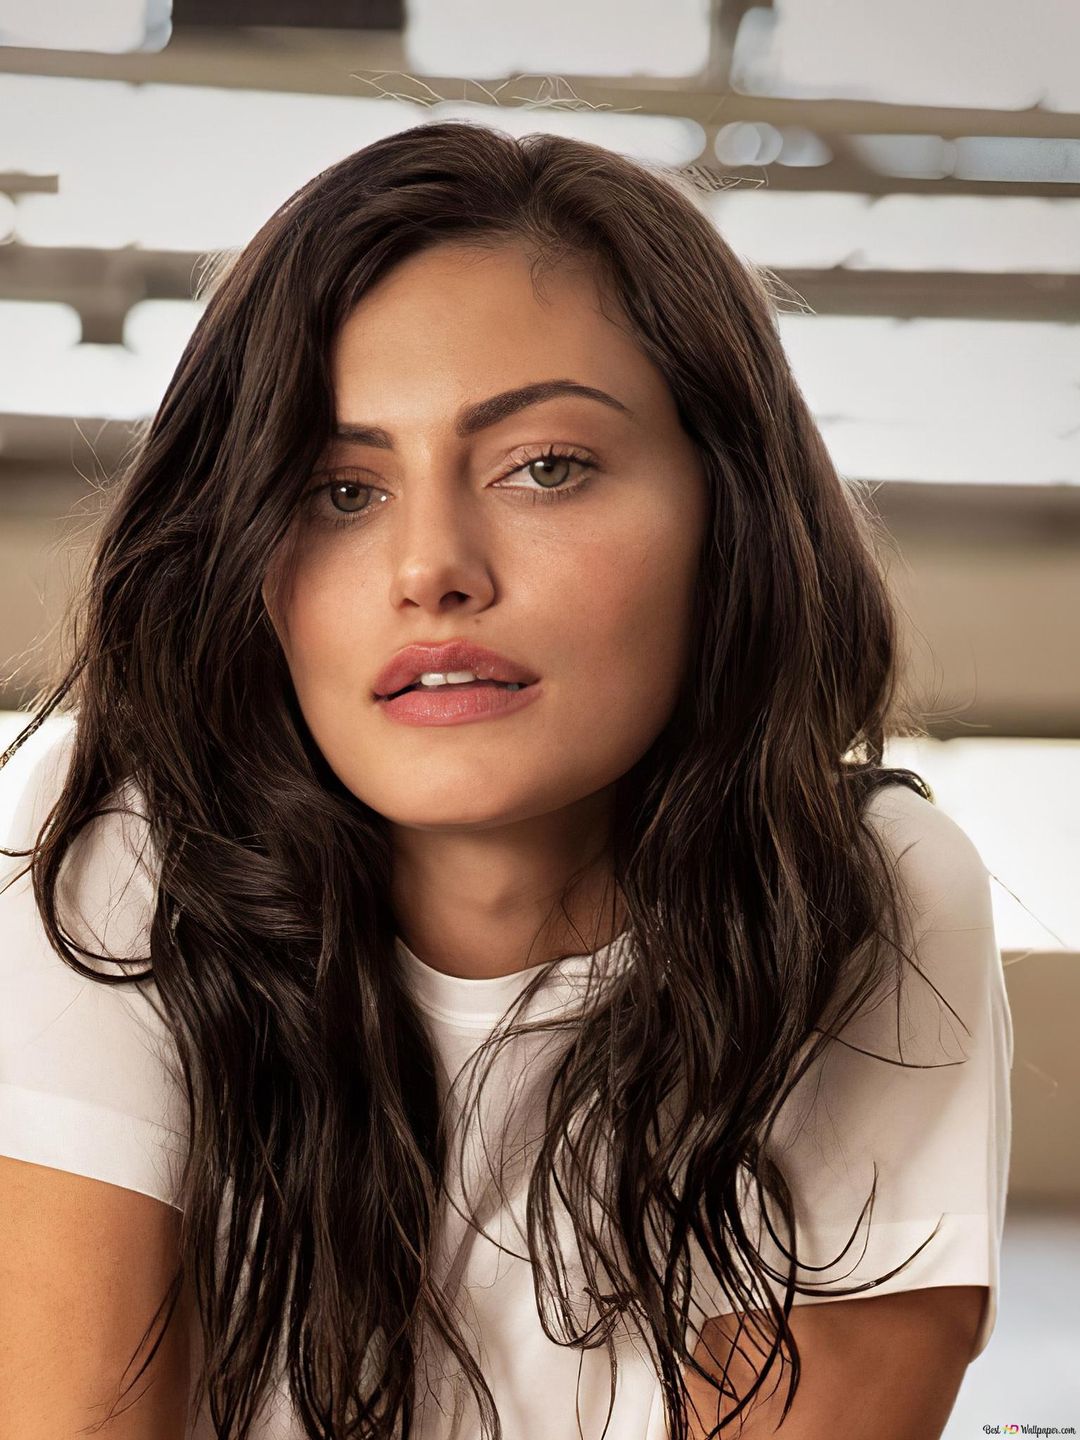 Phoebe Tonkin who is her father